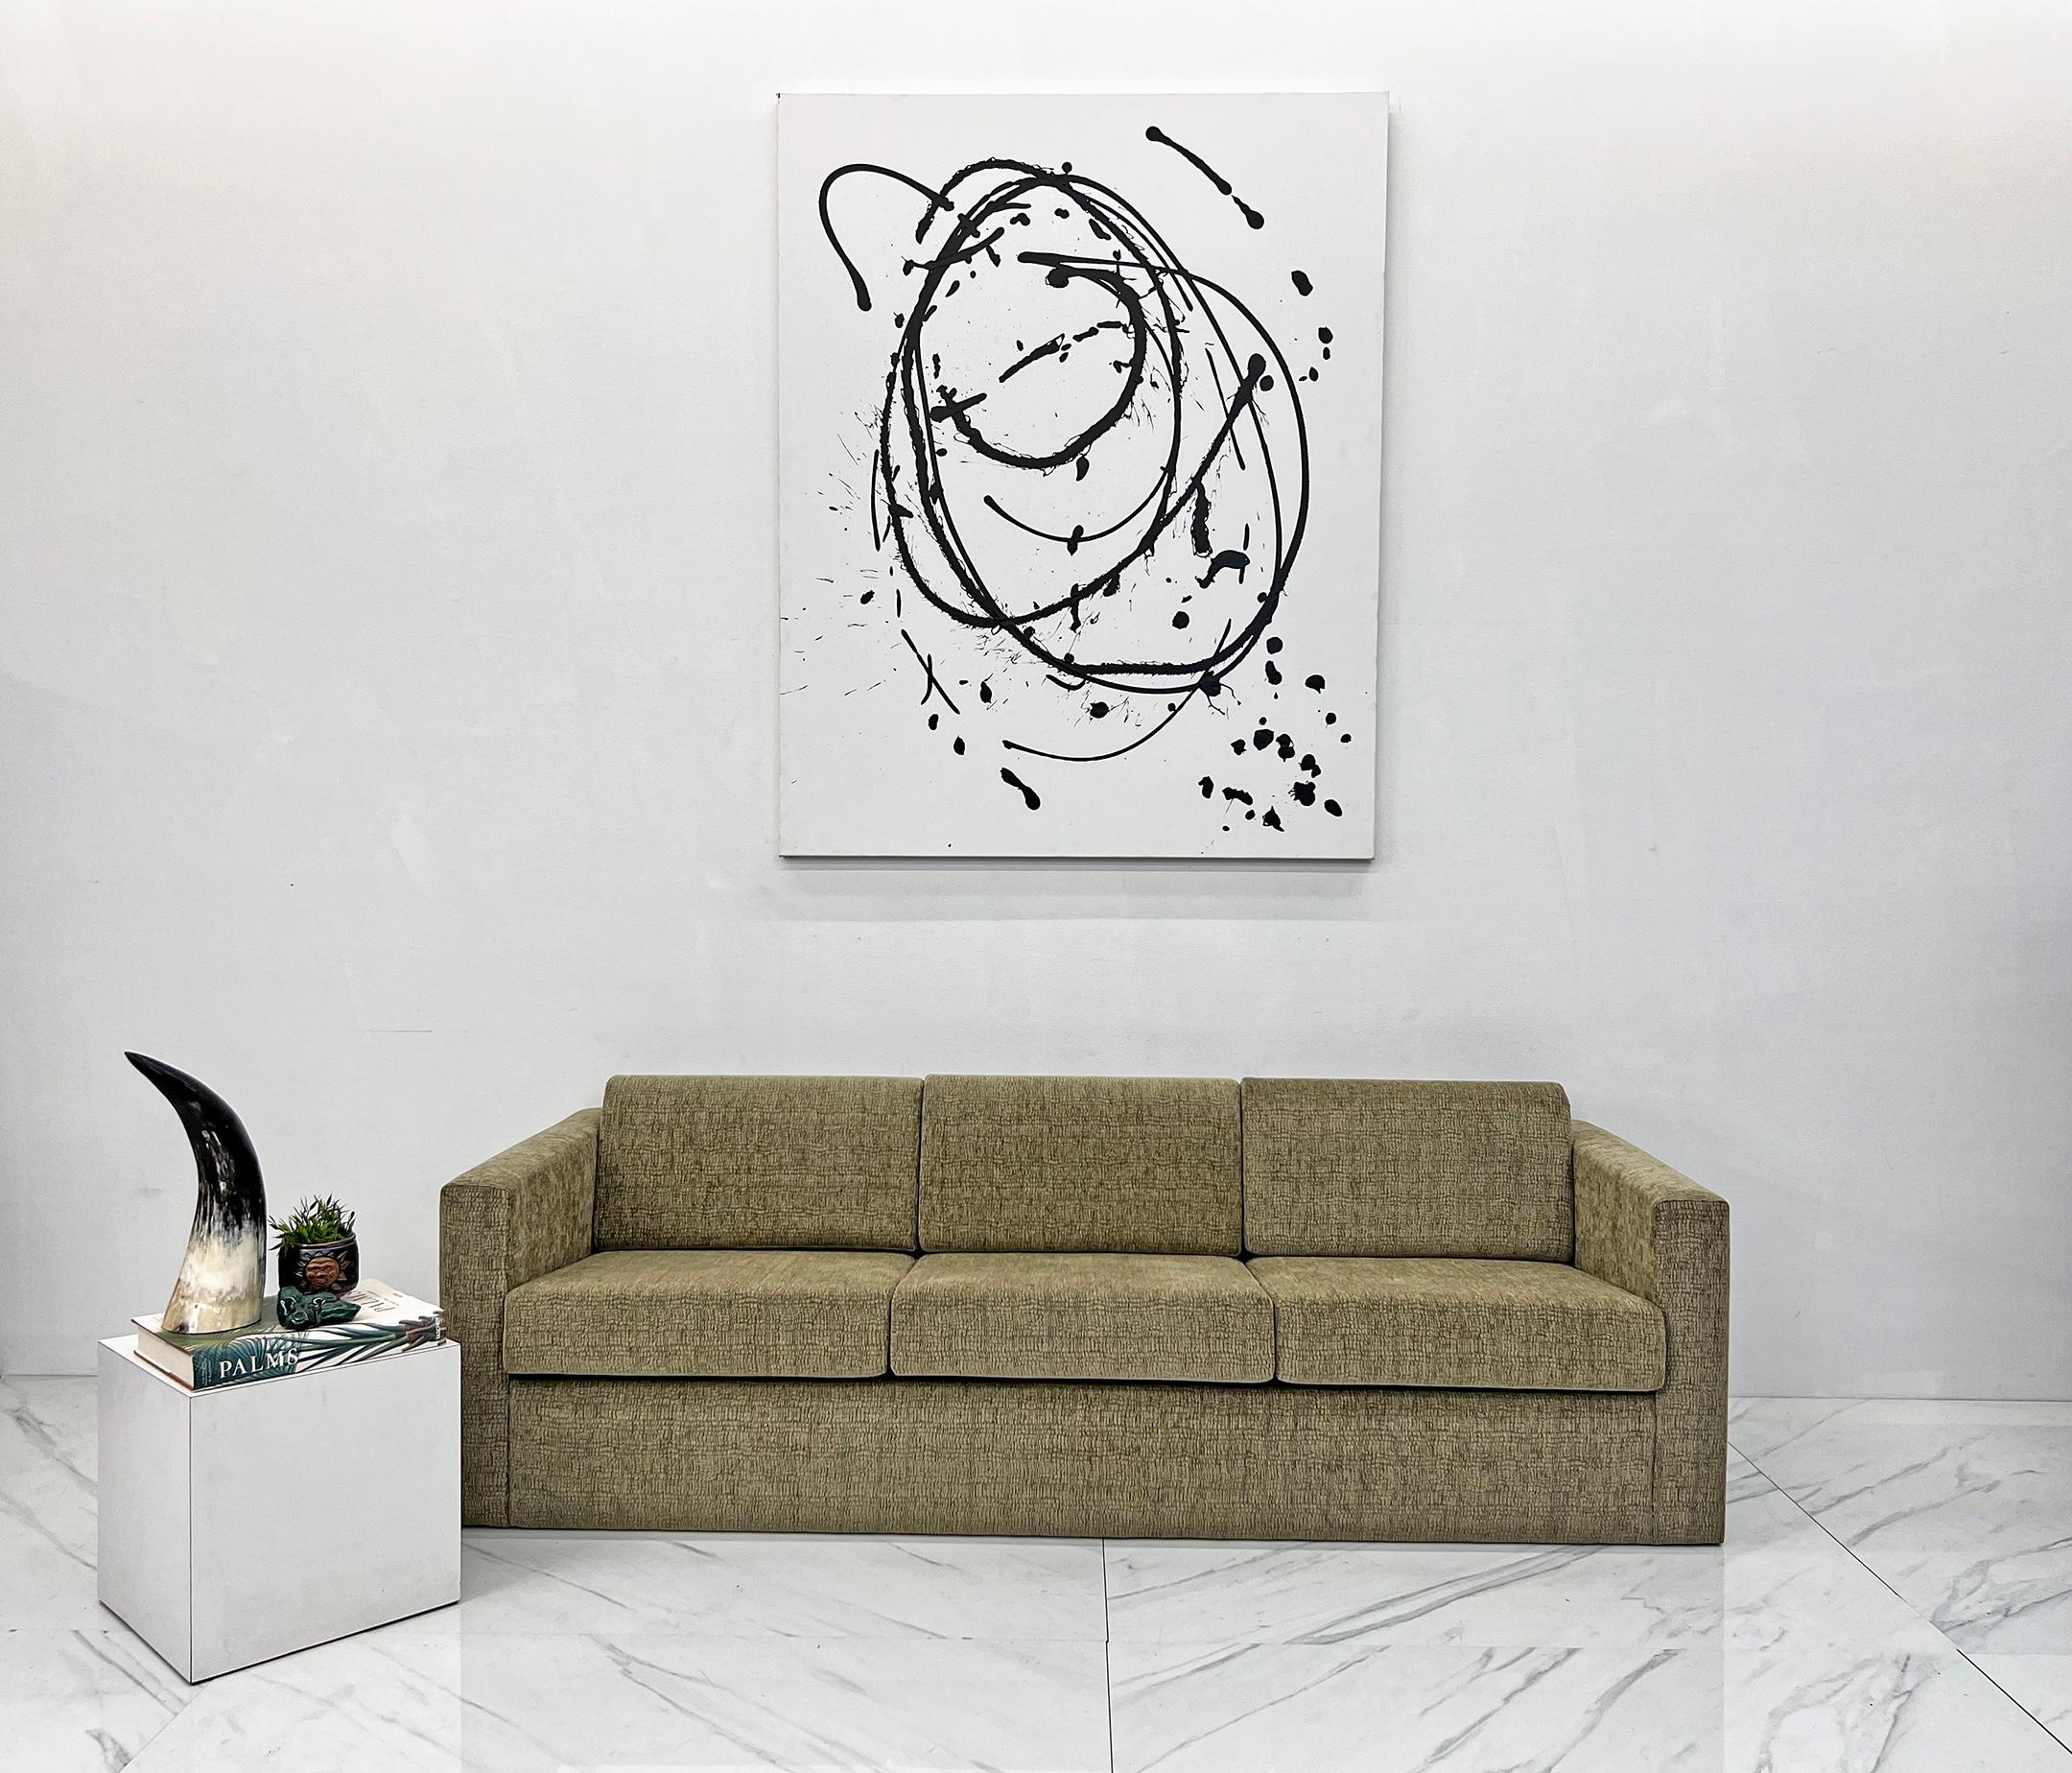 This sofa is a stunner. Classic design meets contemporary allure with the exquisite creation by legendary designer Milo Baughman for Thayer Coggin. A masterpiece that seamlessly bridges the realms of mid-century modern and modern aesthetics, this